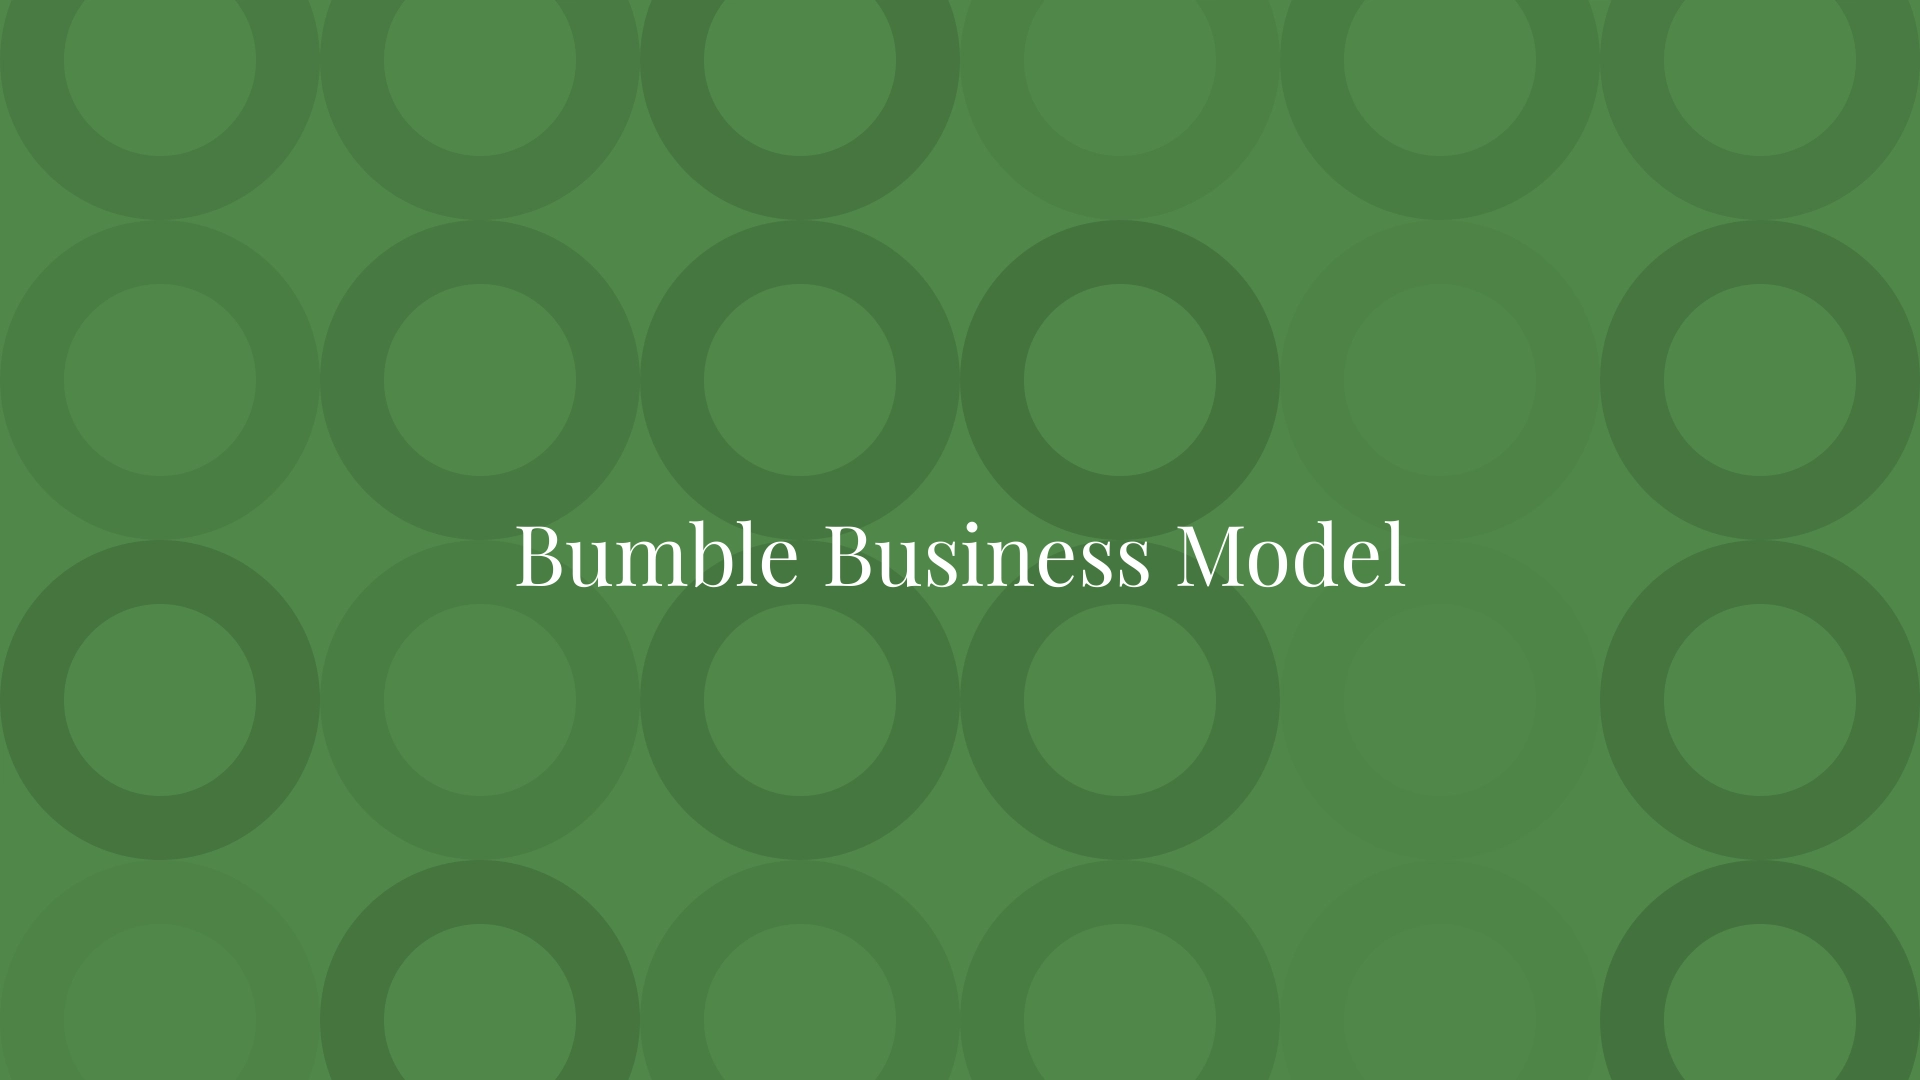 Bumble Business Model